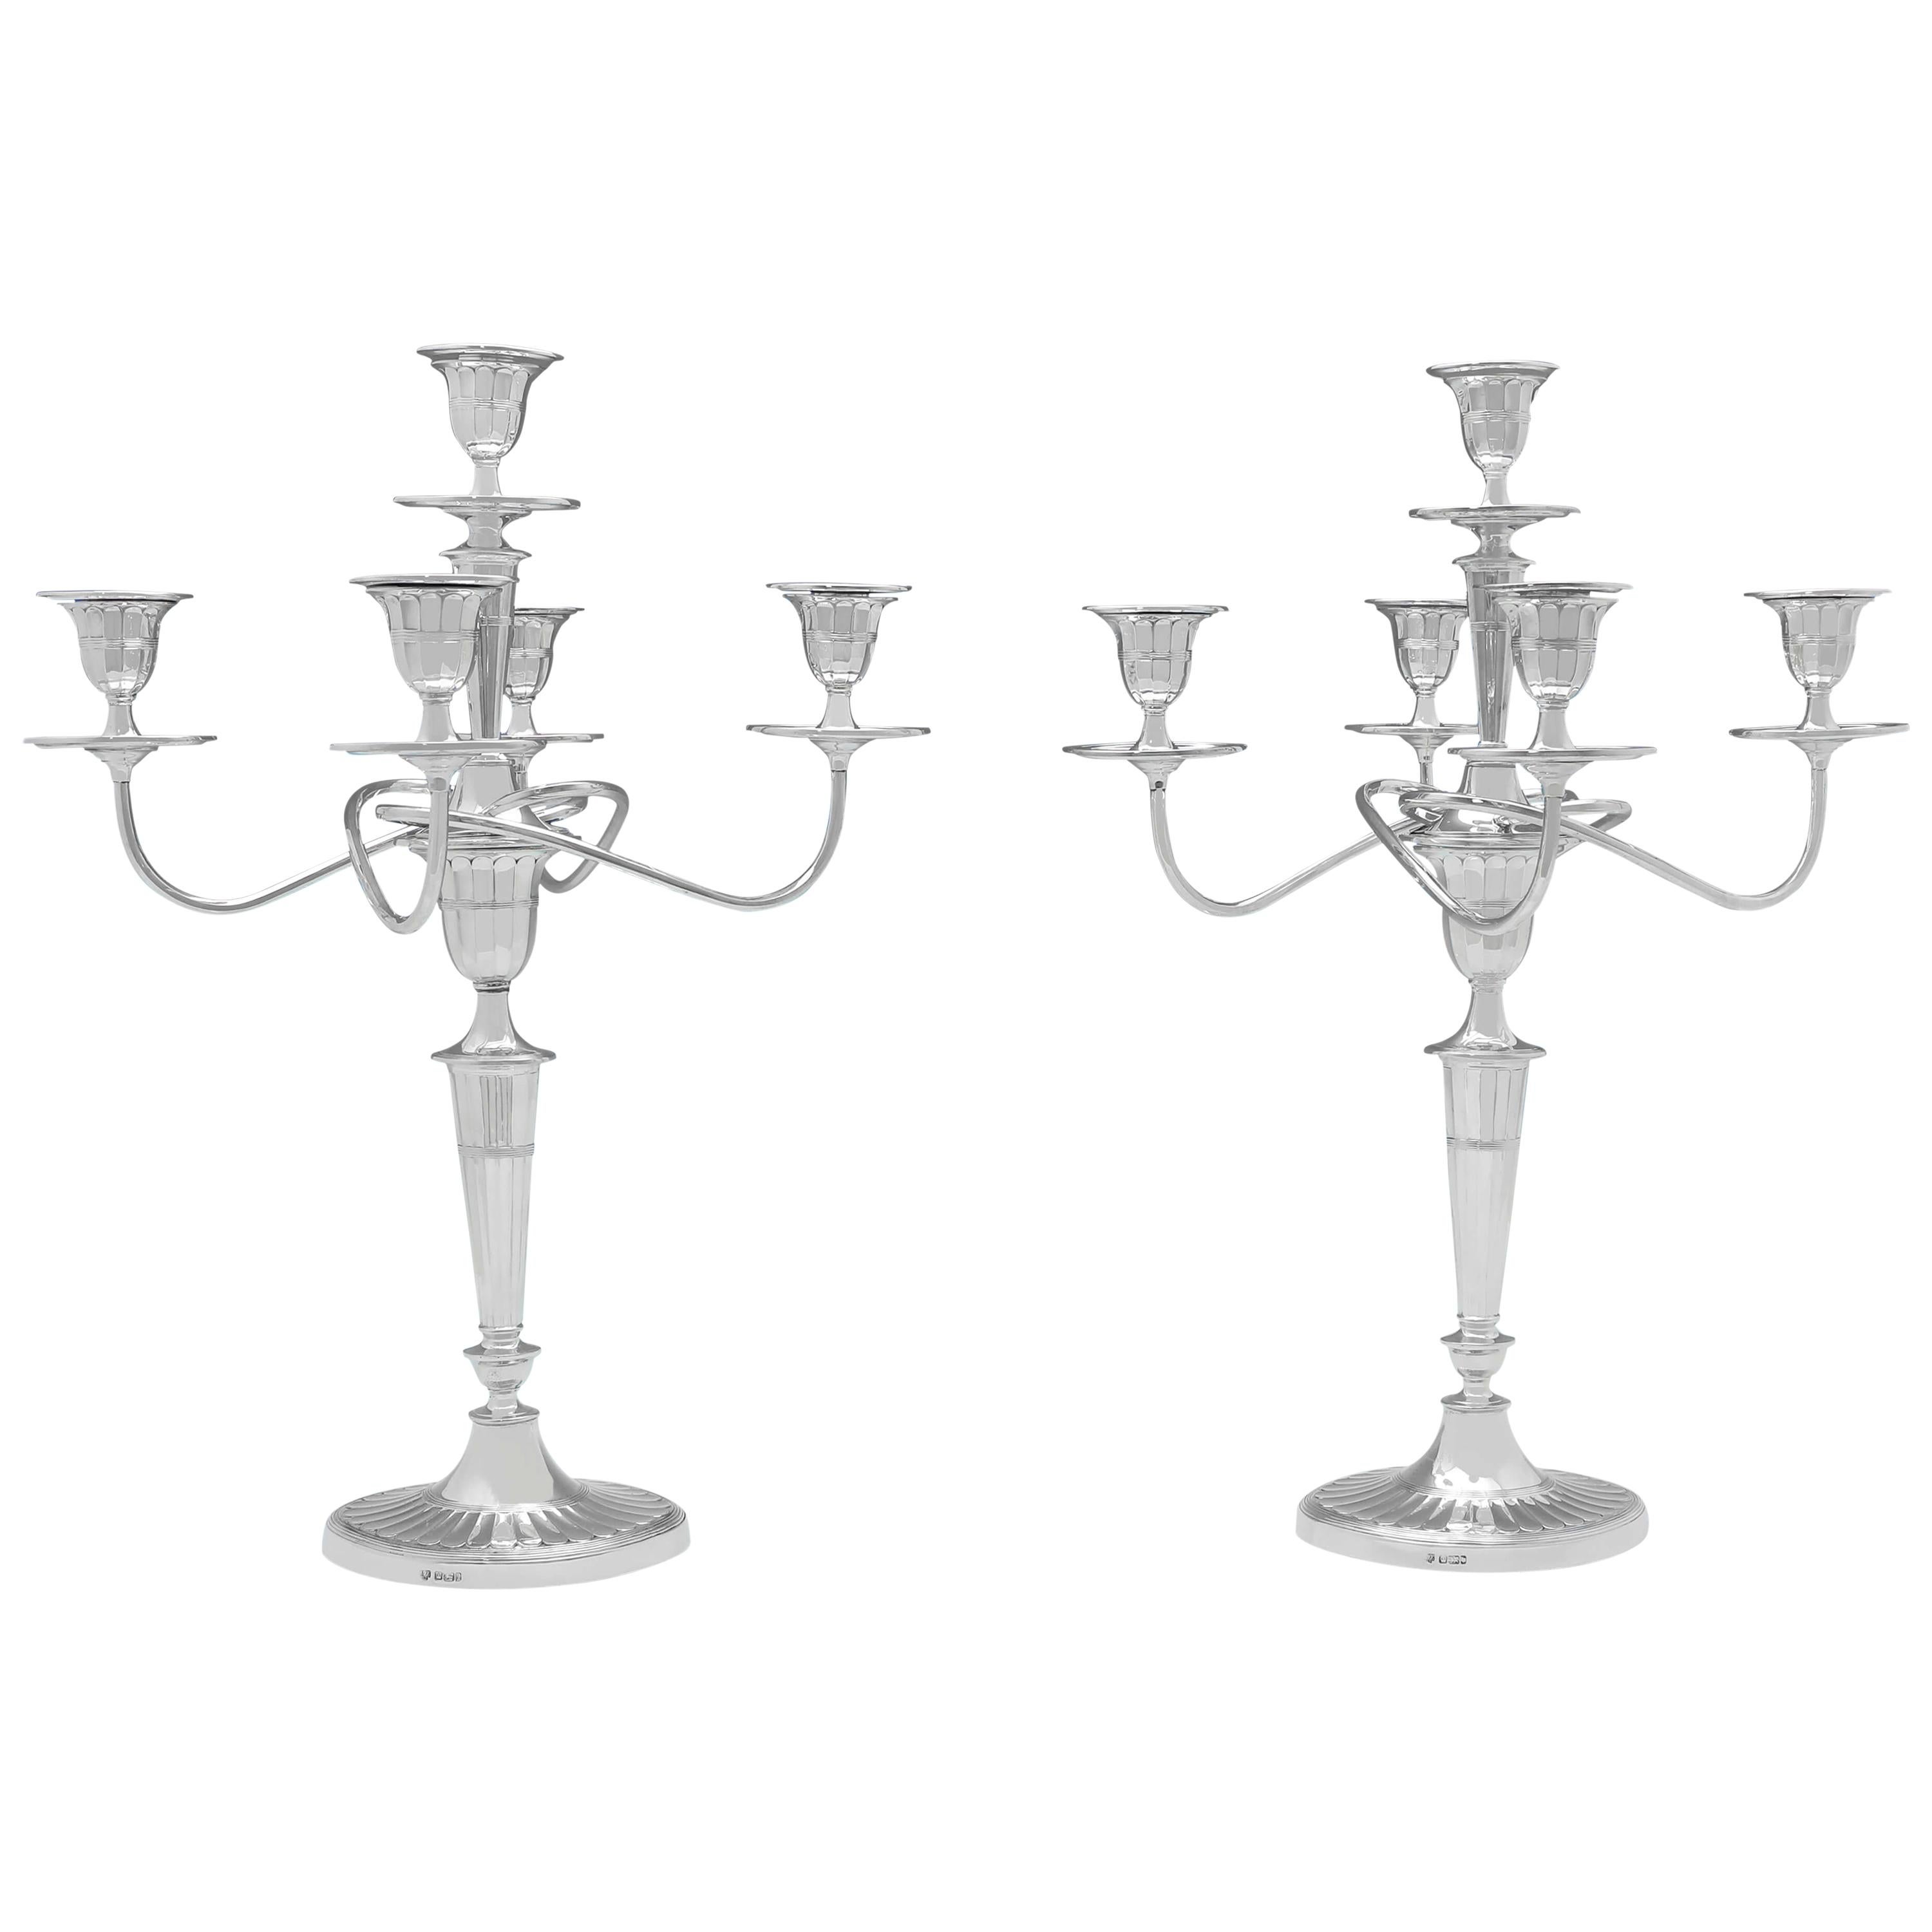 Pair of 5-Light Antique Sterling Silver Candelabra in Batwing Style Made in 1901 For Sale